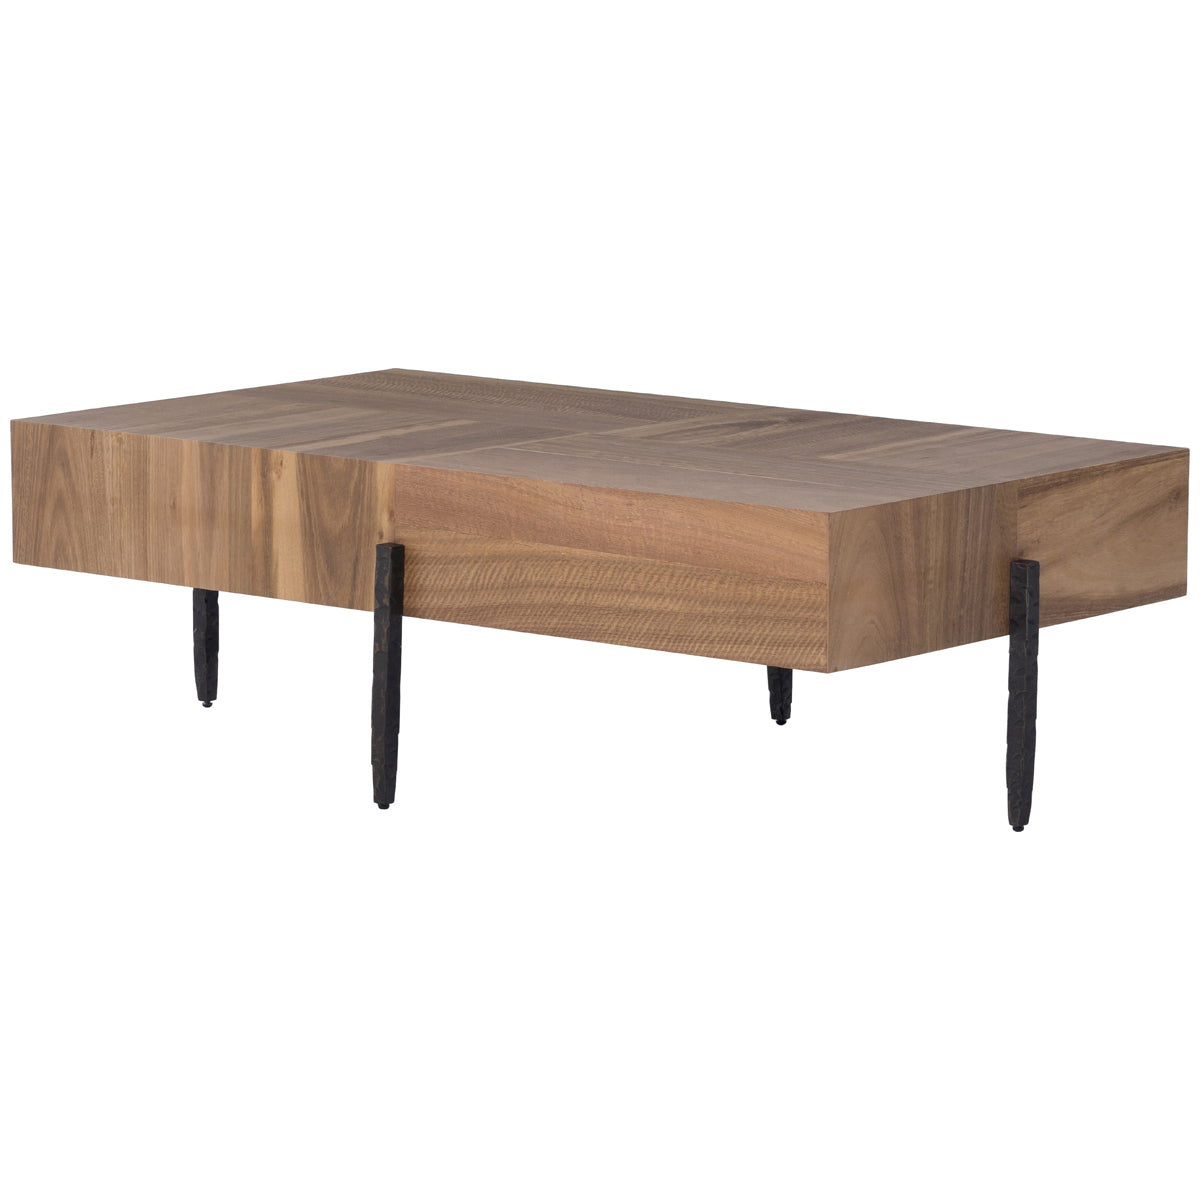 Four Hands Wesson Indra Coffee Table - Natural Yukas